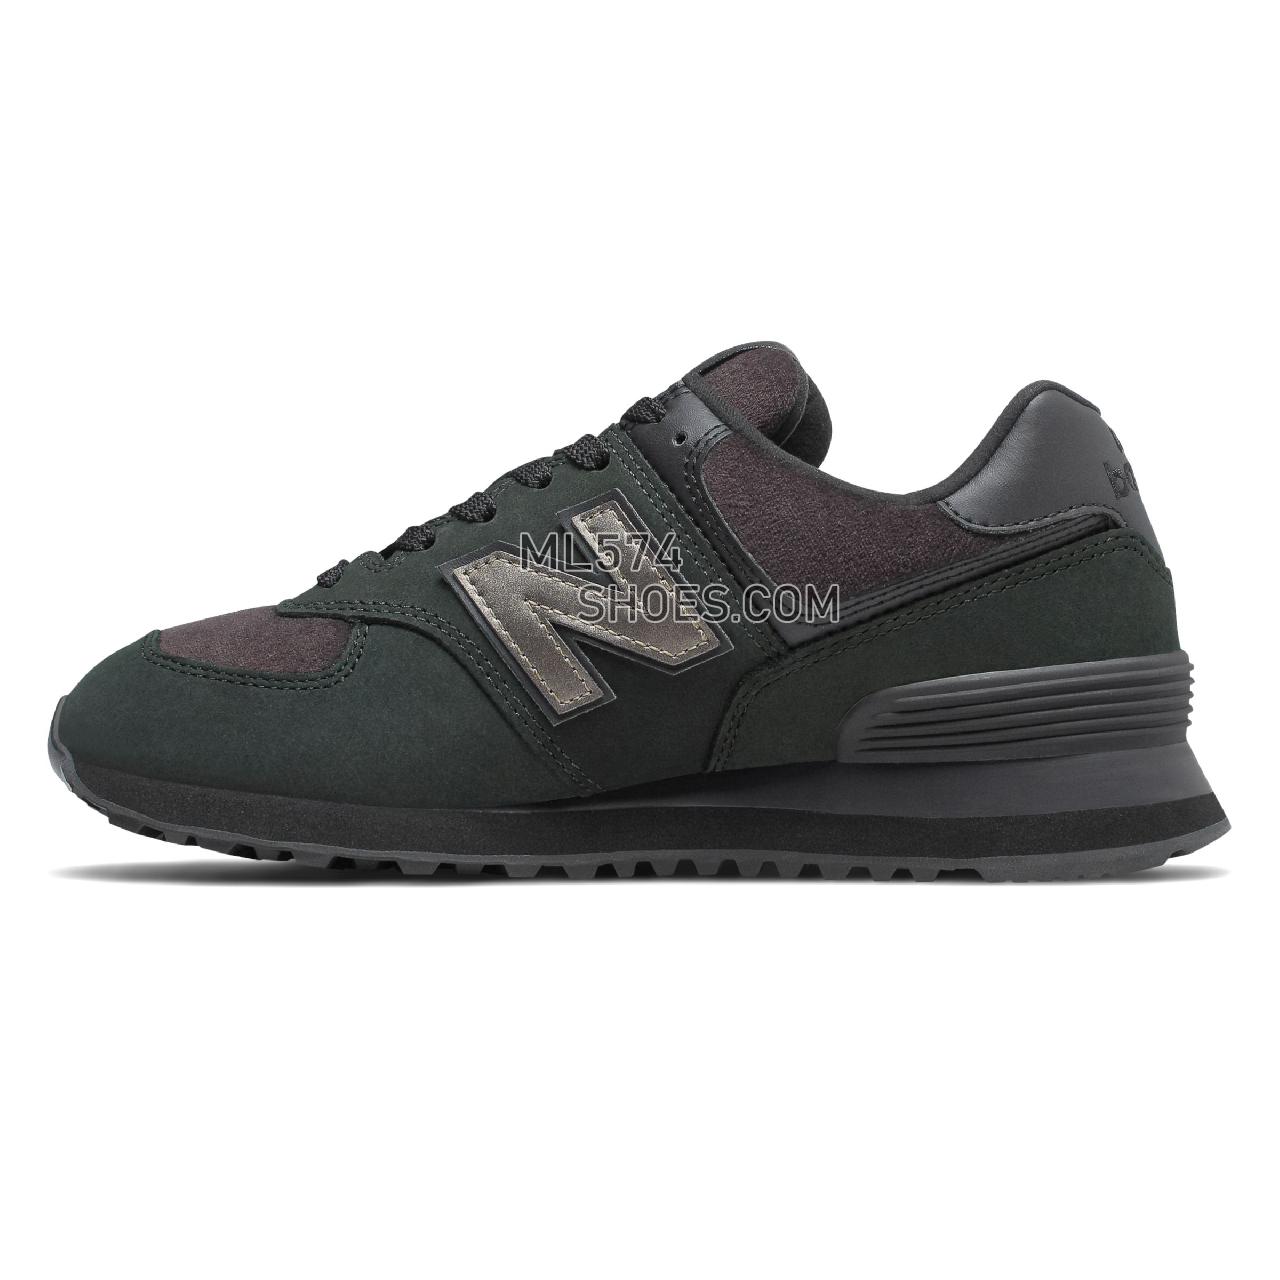 New Balance 574 - Women's Classic Sneakers - Black with Magnet - WL574LDG